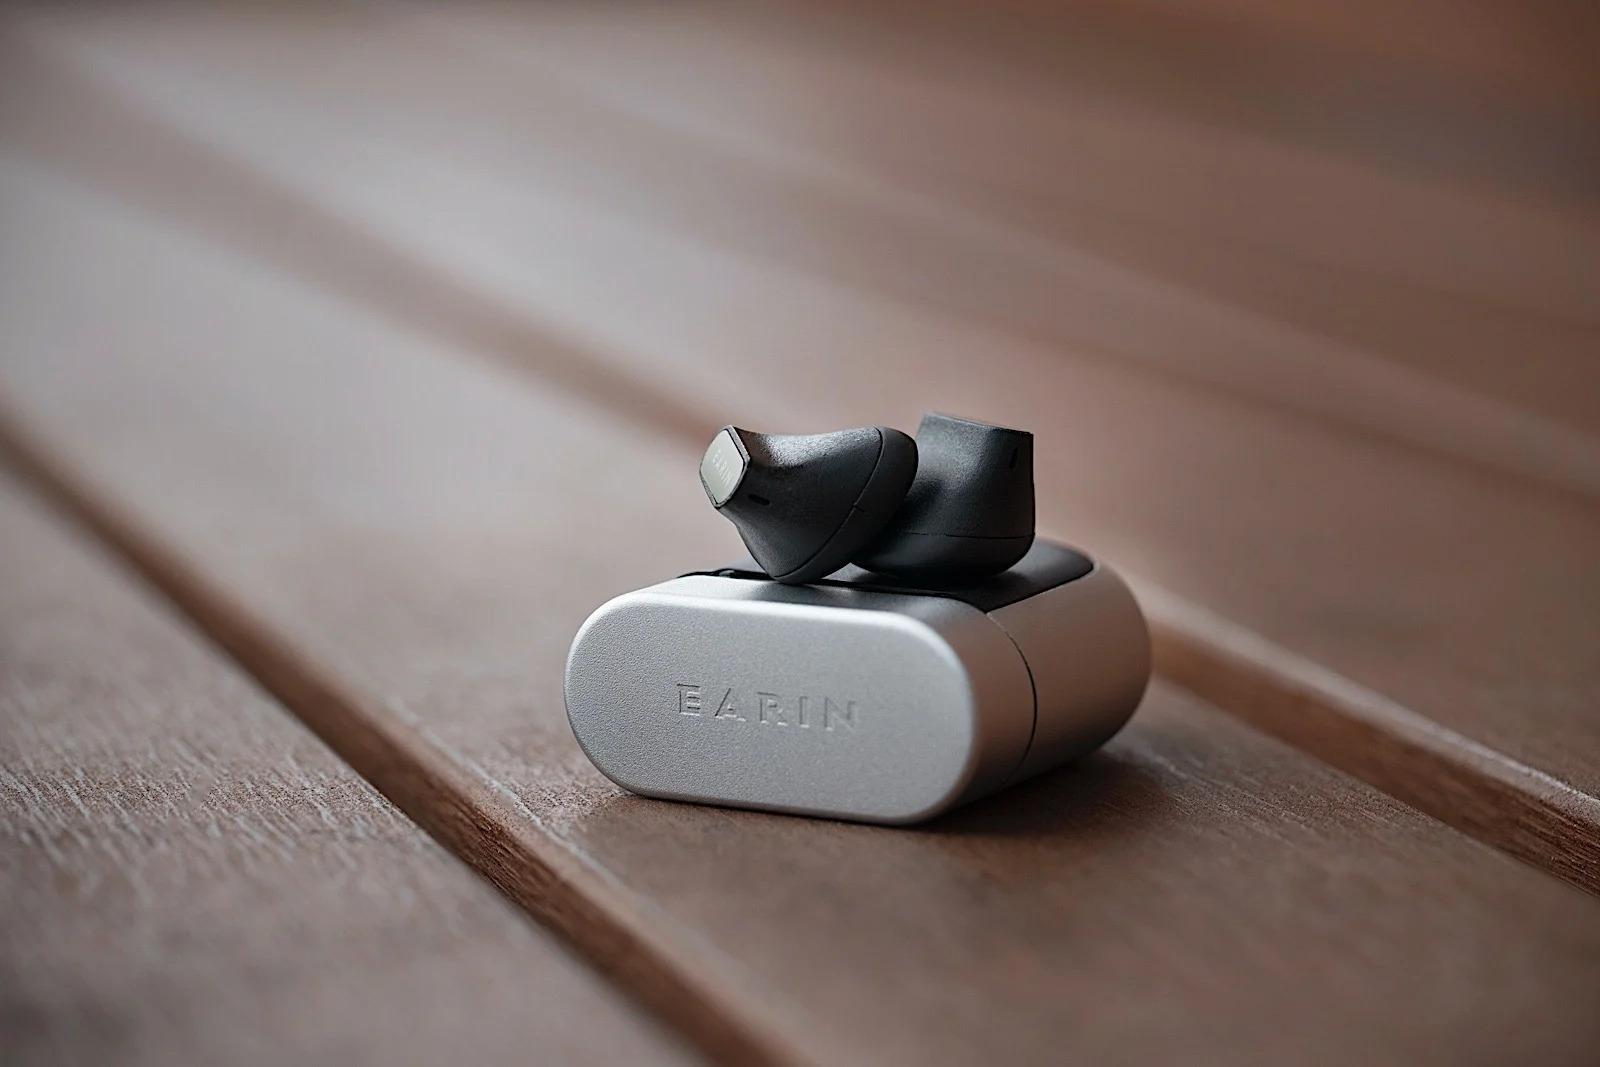 Earin's third-generation true wireless earbuds feature an open design and a host of handy features for $199.